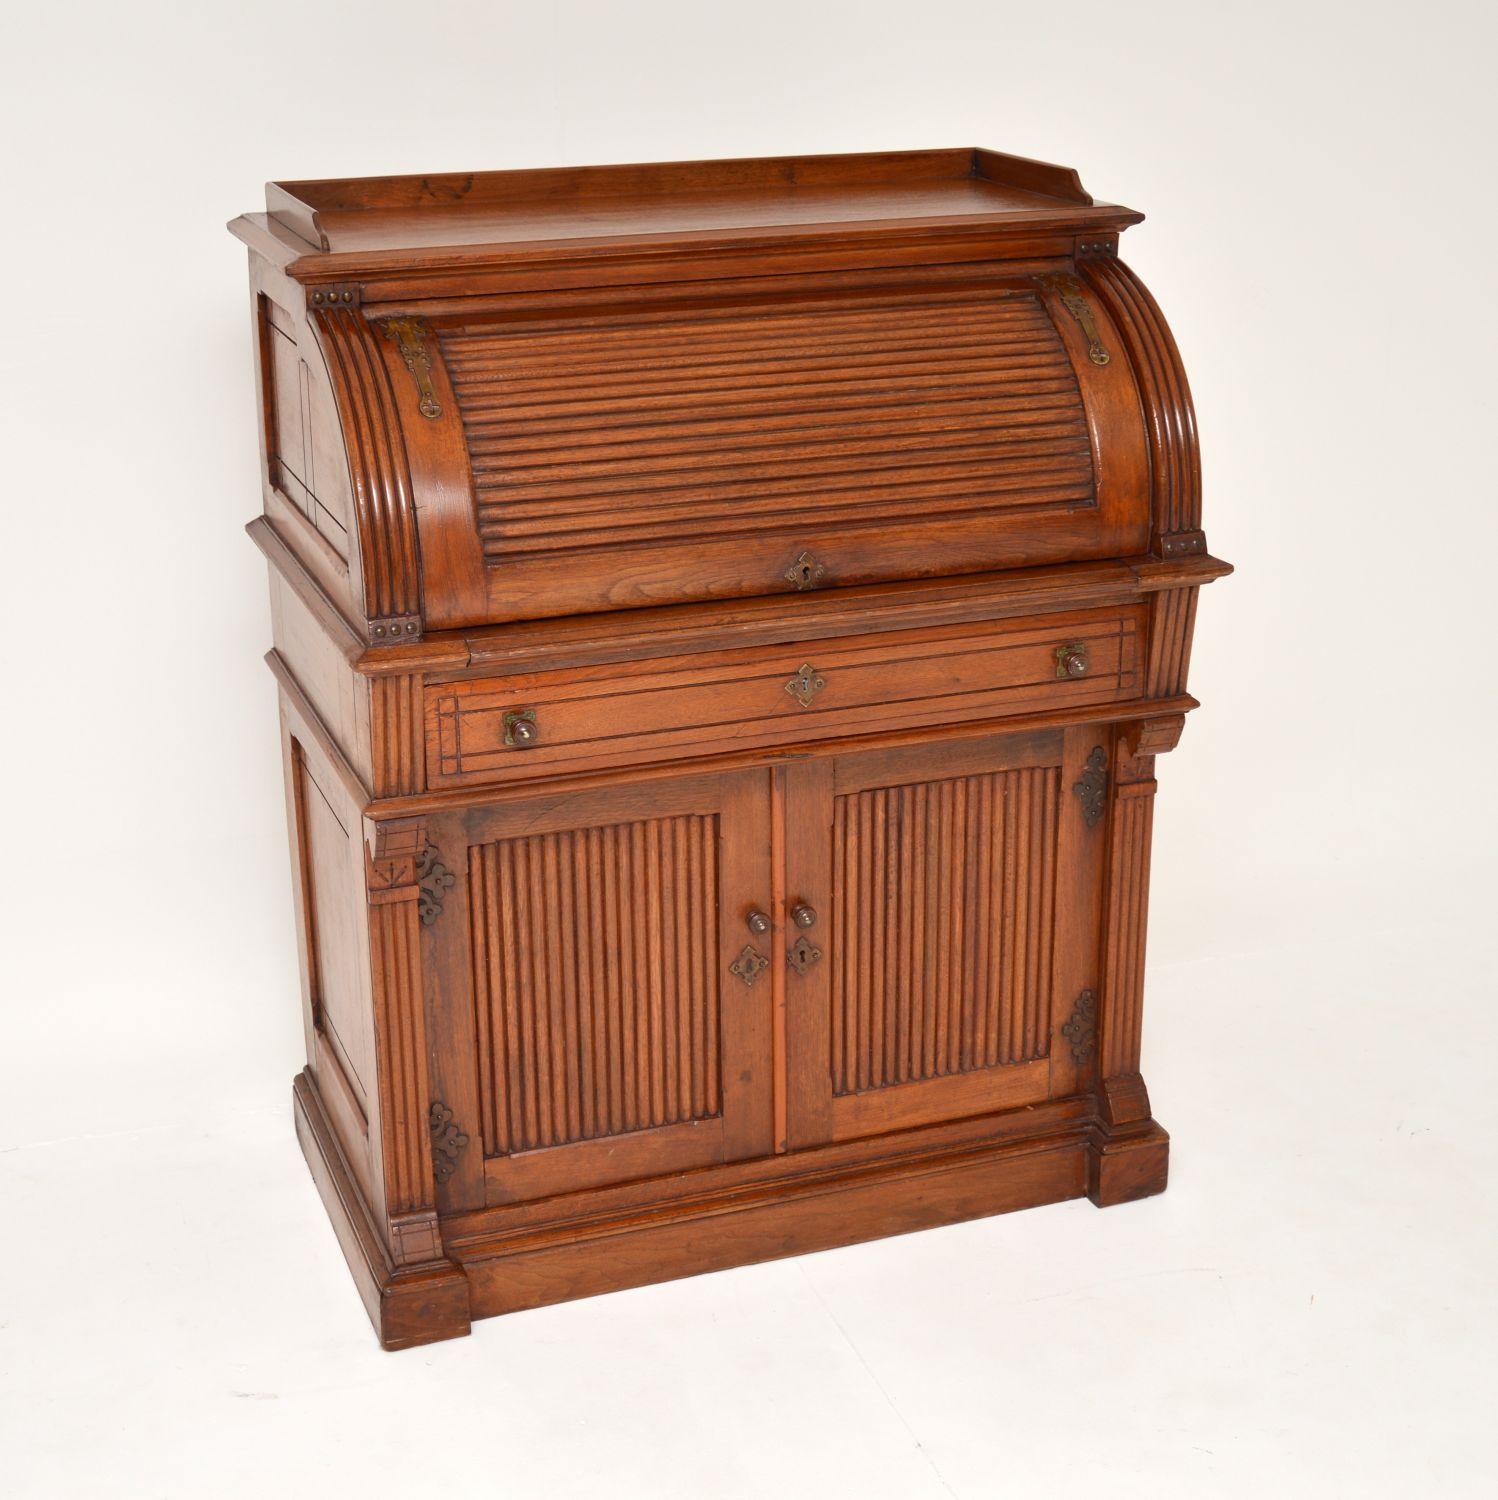 A superb original Victorian Arts & Crafts period tambour top bureau in solid walnut. This was made in England, it dates from around 1880-90’s period.

It is of amazing quality, with a beautiful and very practical design. There are gorgeous pierced